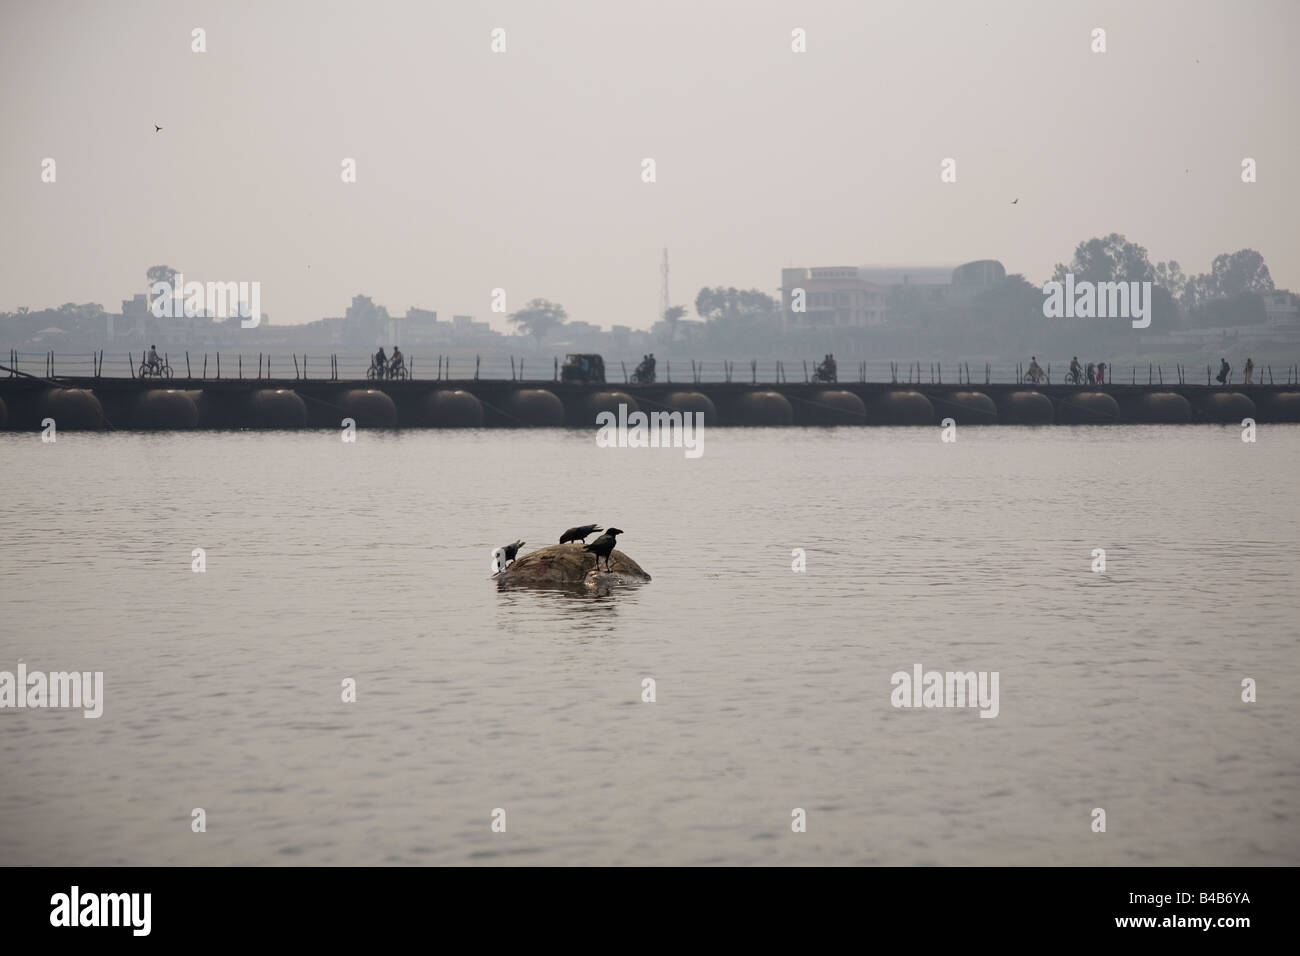 The body of a dead cow is pecked at by crows as it floats bloated in the river Ganga (Ganges) in the city of Varanasi, India. Stock Photo